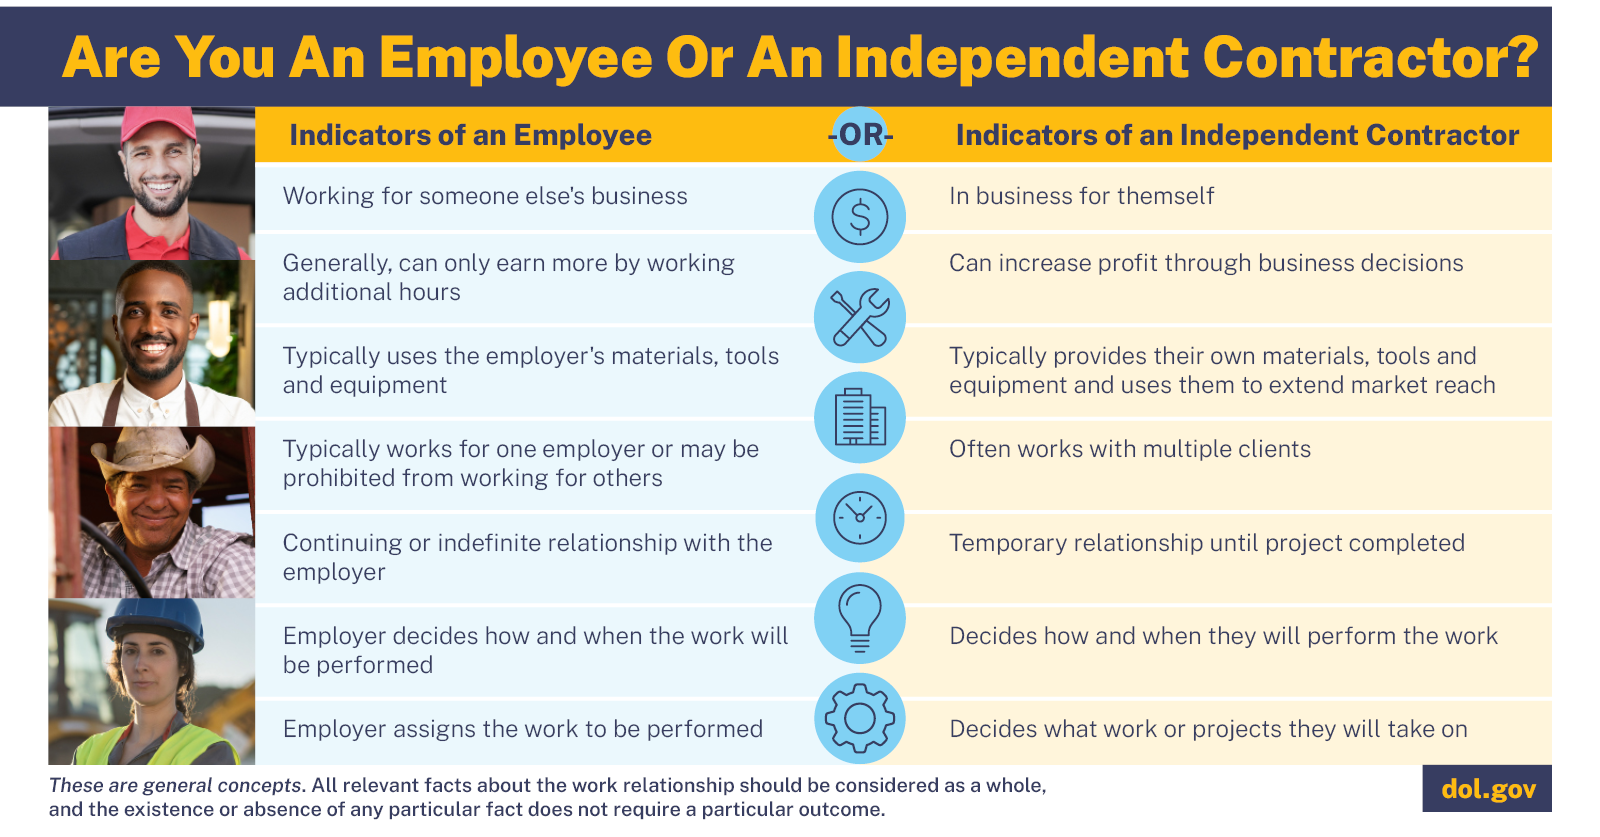 Are you an employee or an Independent Contractor?